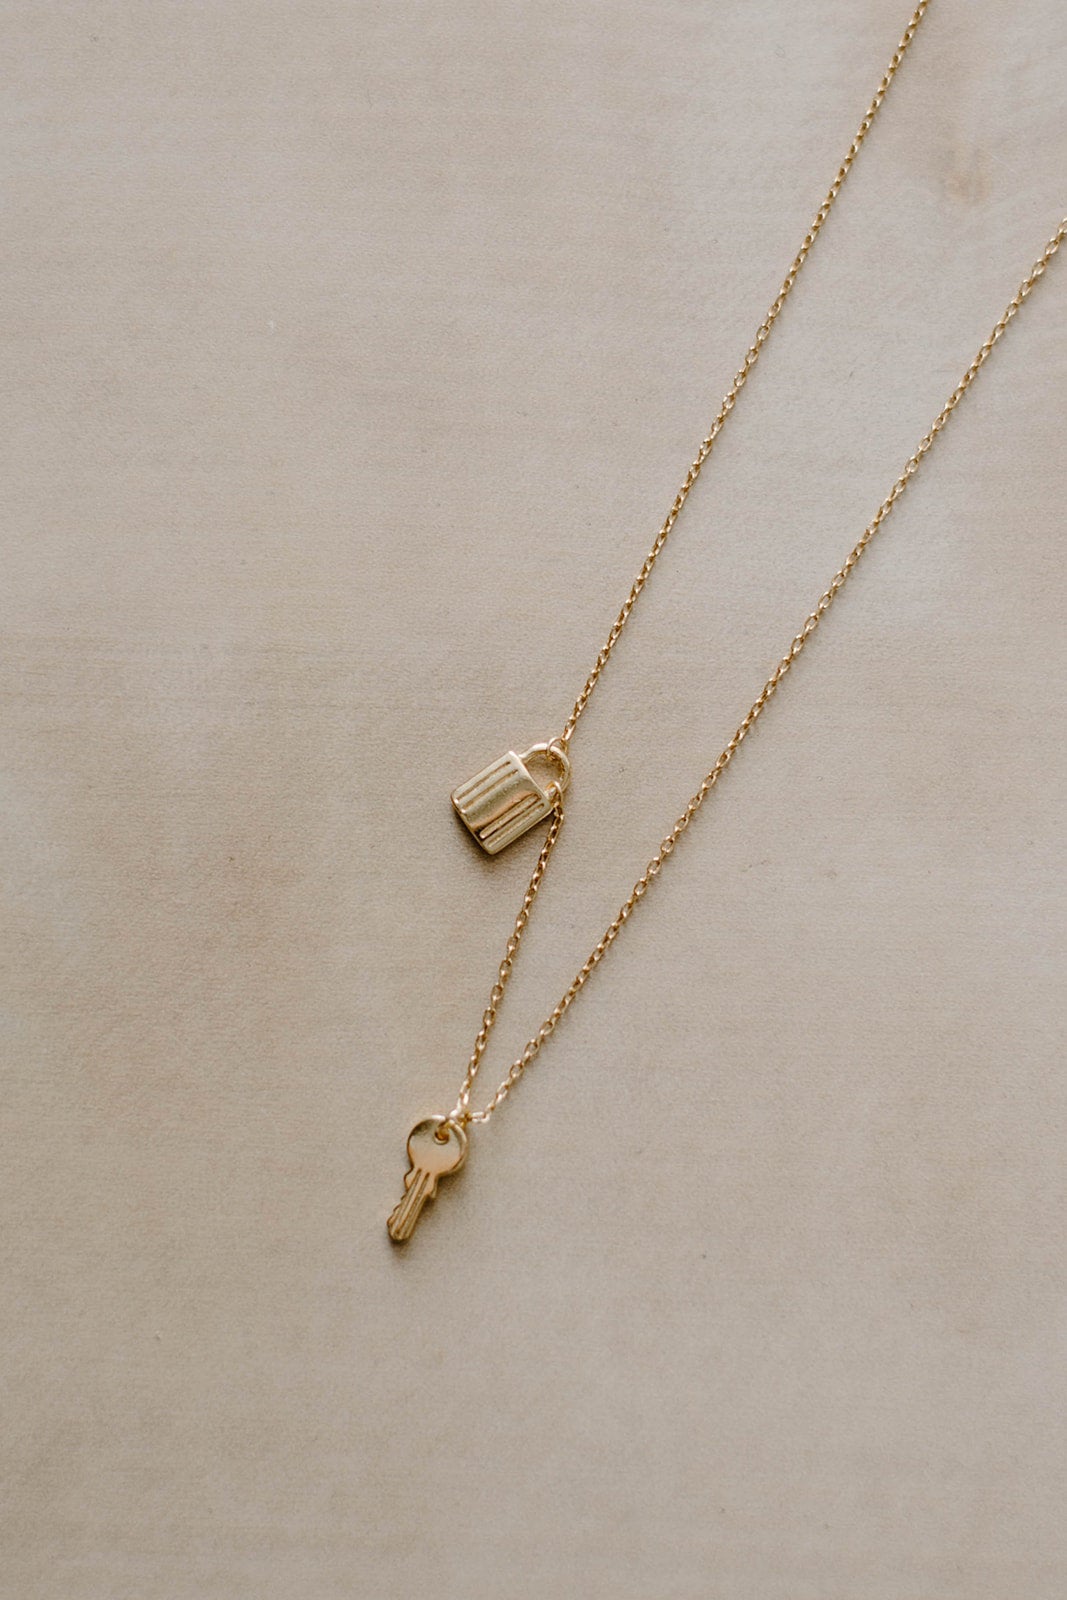 Golden Lock Key Charm Necklace, 18K Gold Plated, .925 Sterling Silver Everyday Dainty Necklace